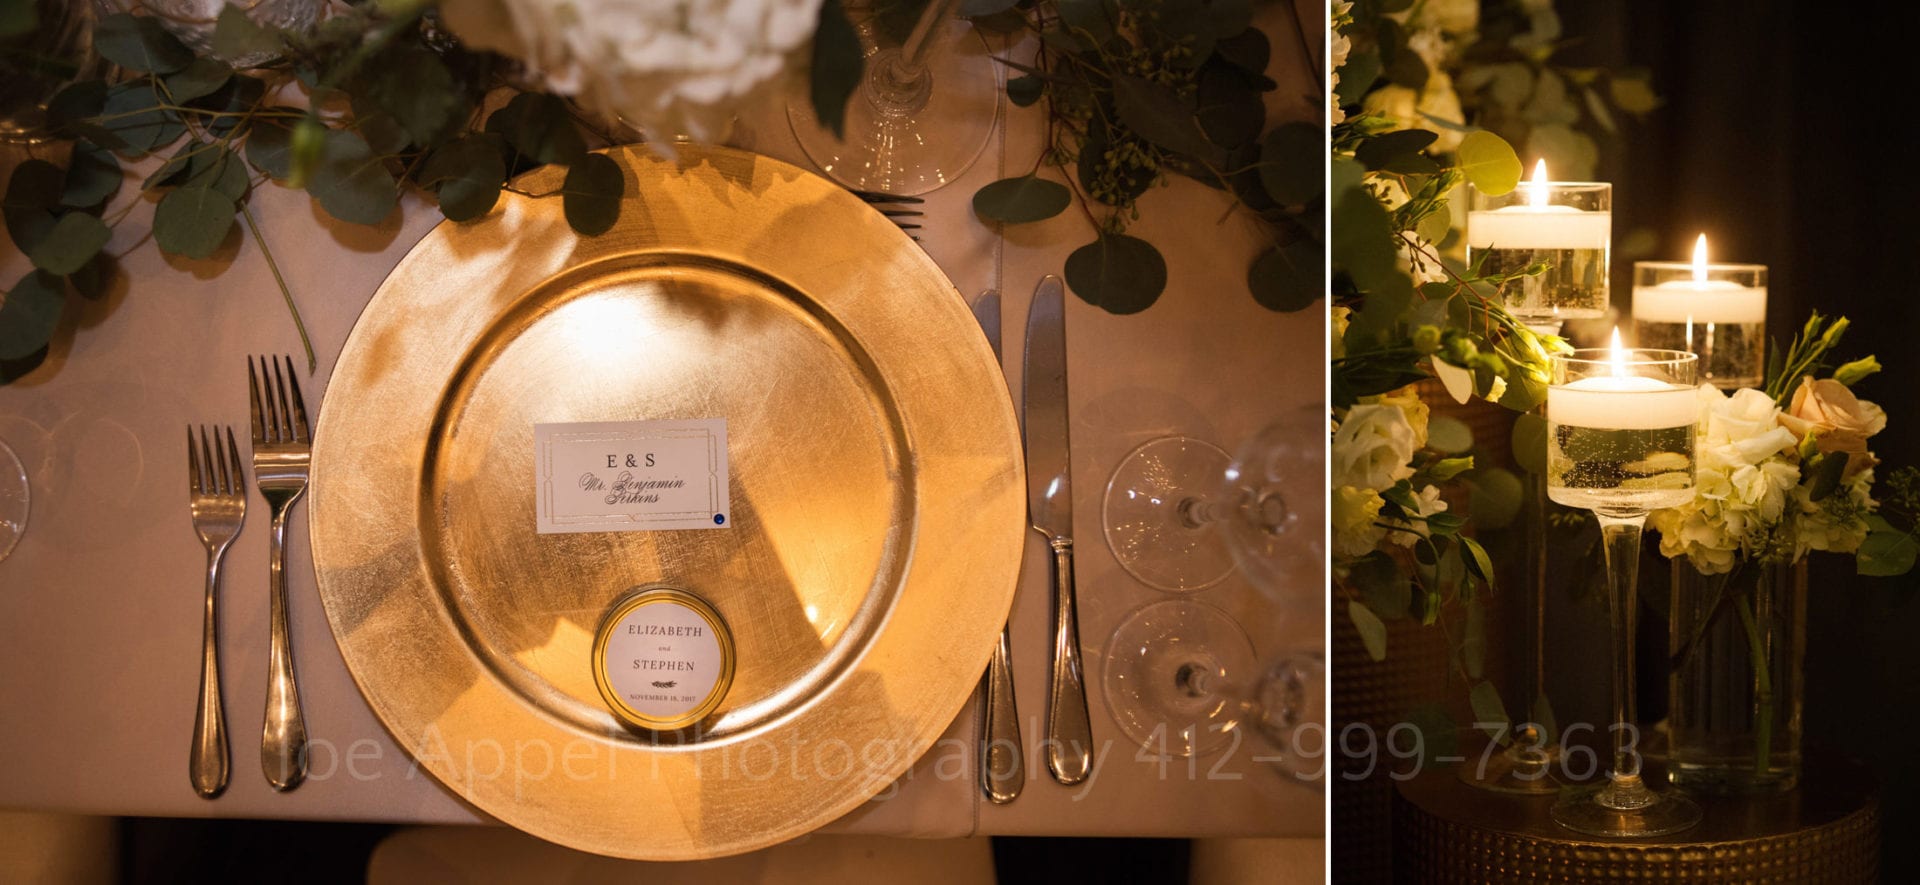 a place card and wedding favor sit on top of a gold dinner plate surrounded by glasses and silverware